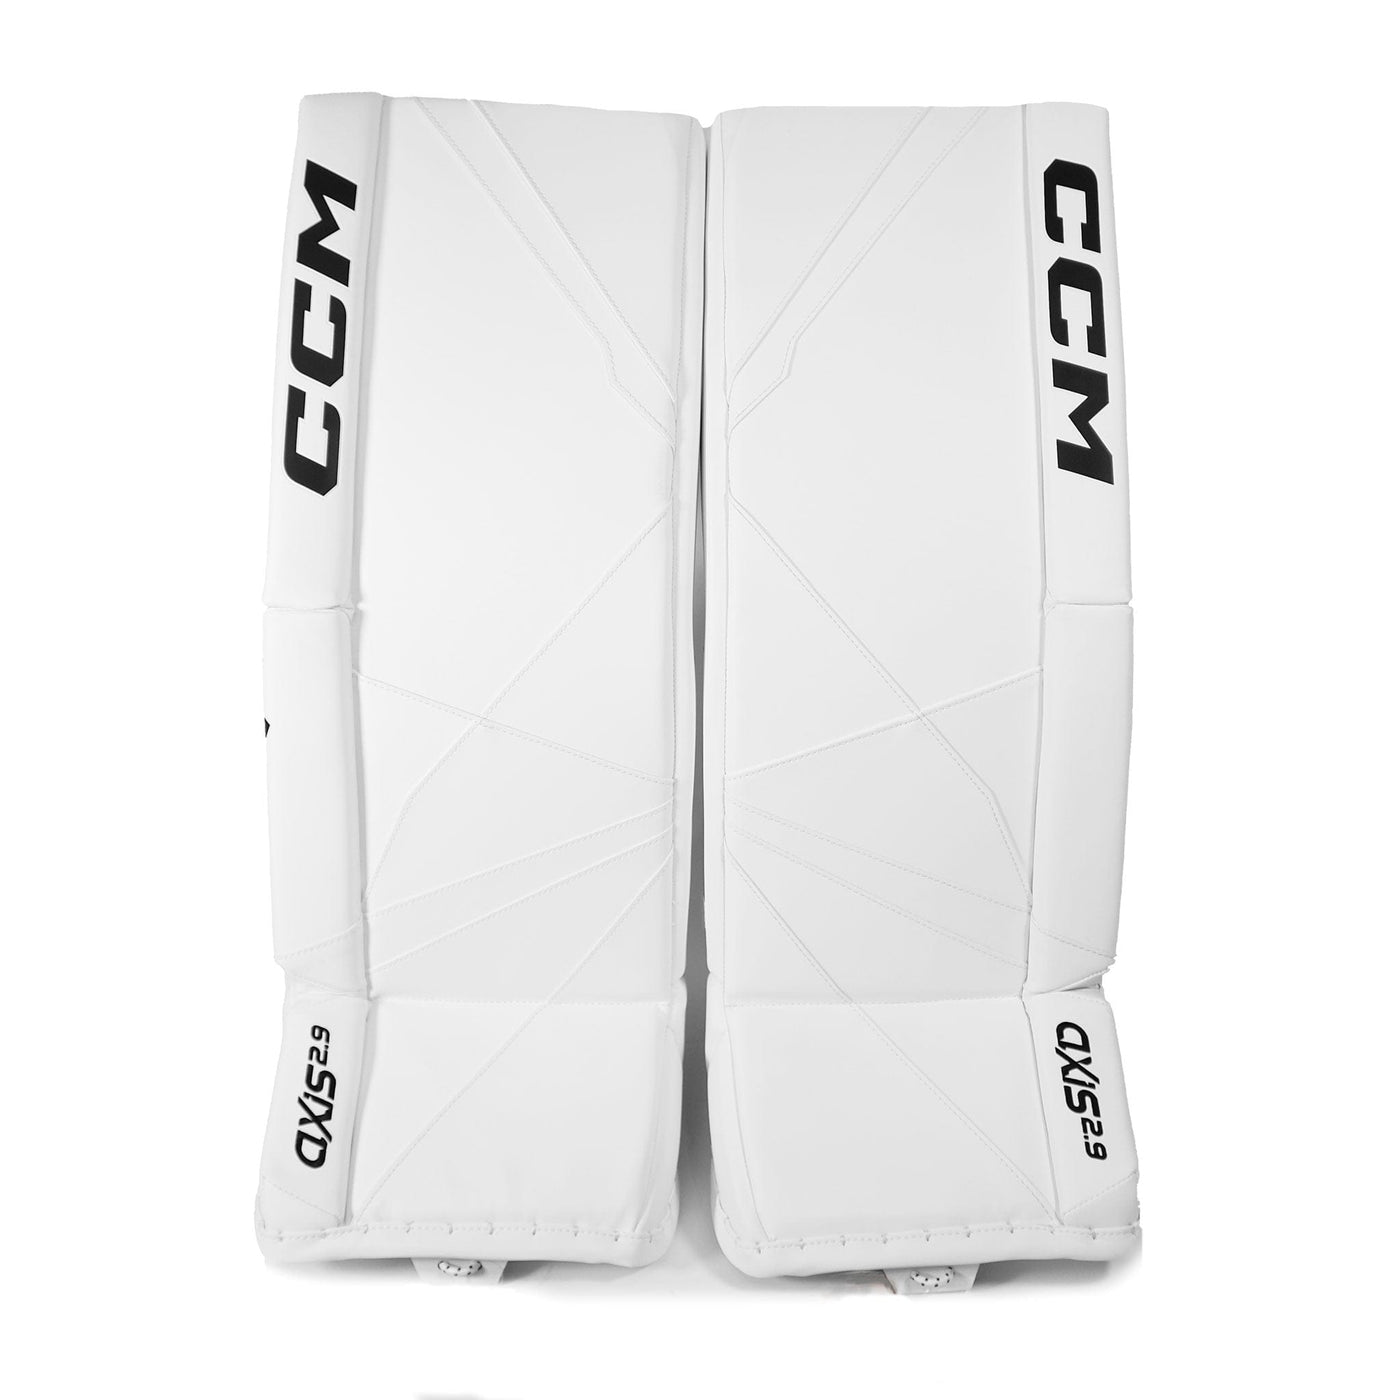 CCM Axis 2.9 Intermediate Goalie Leg Pads - Source Exclusive - The Hockey Shop Source For Sports